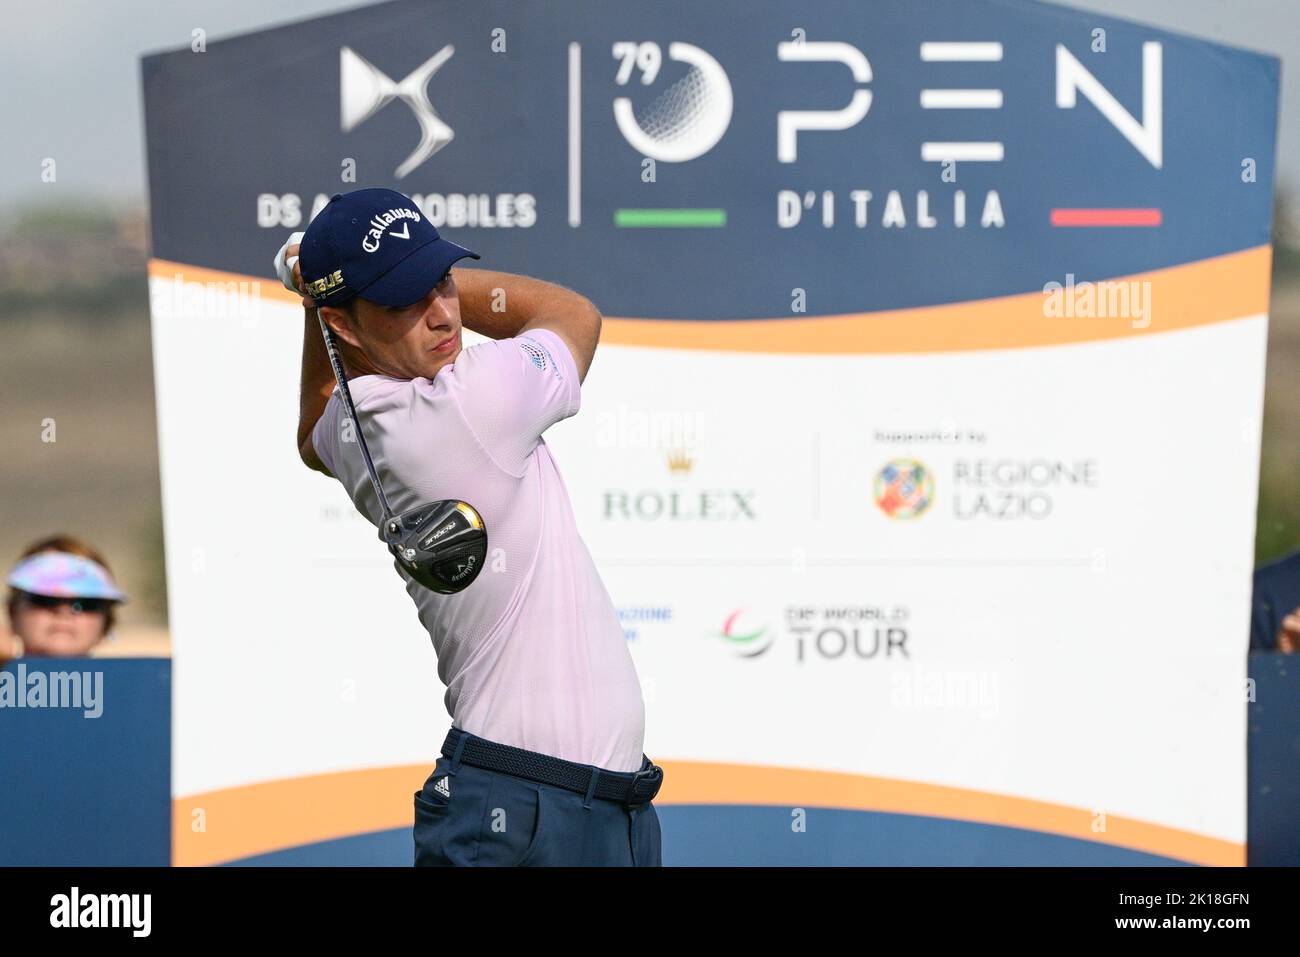 79th edition of the Italian Open in Rome